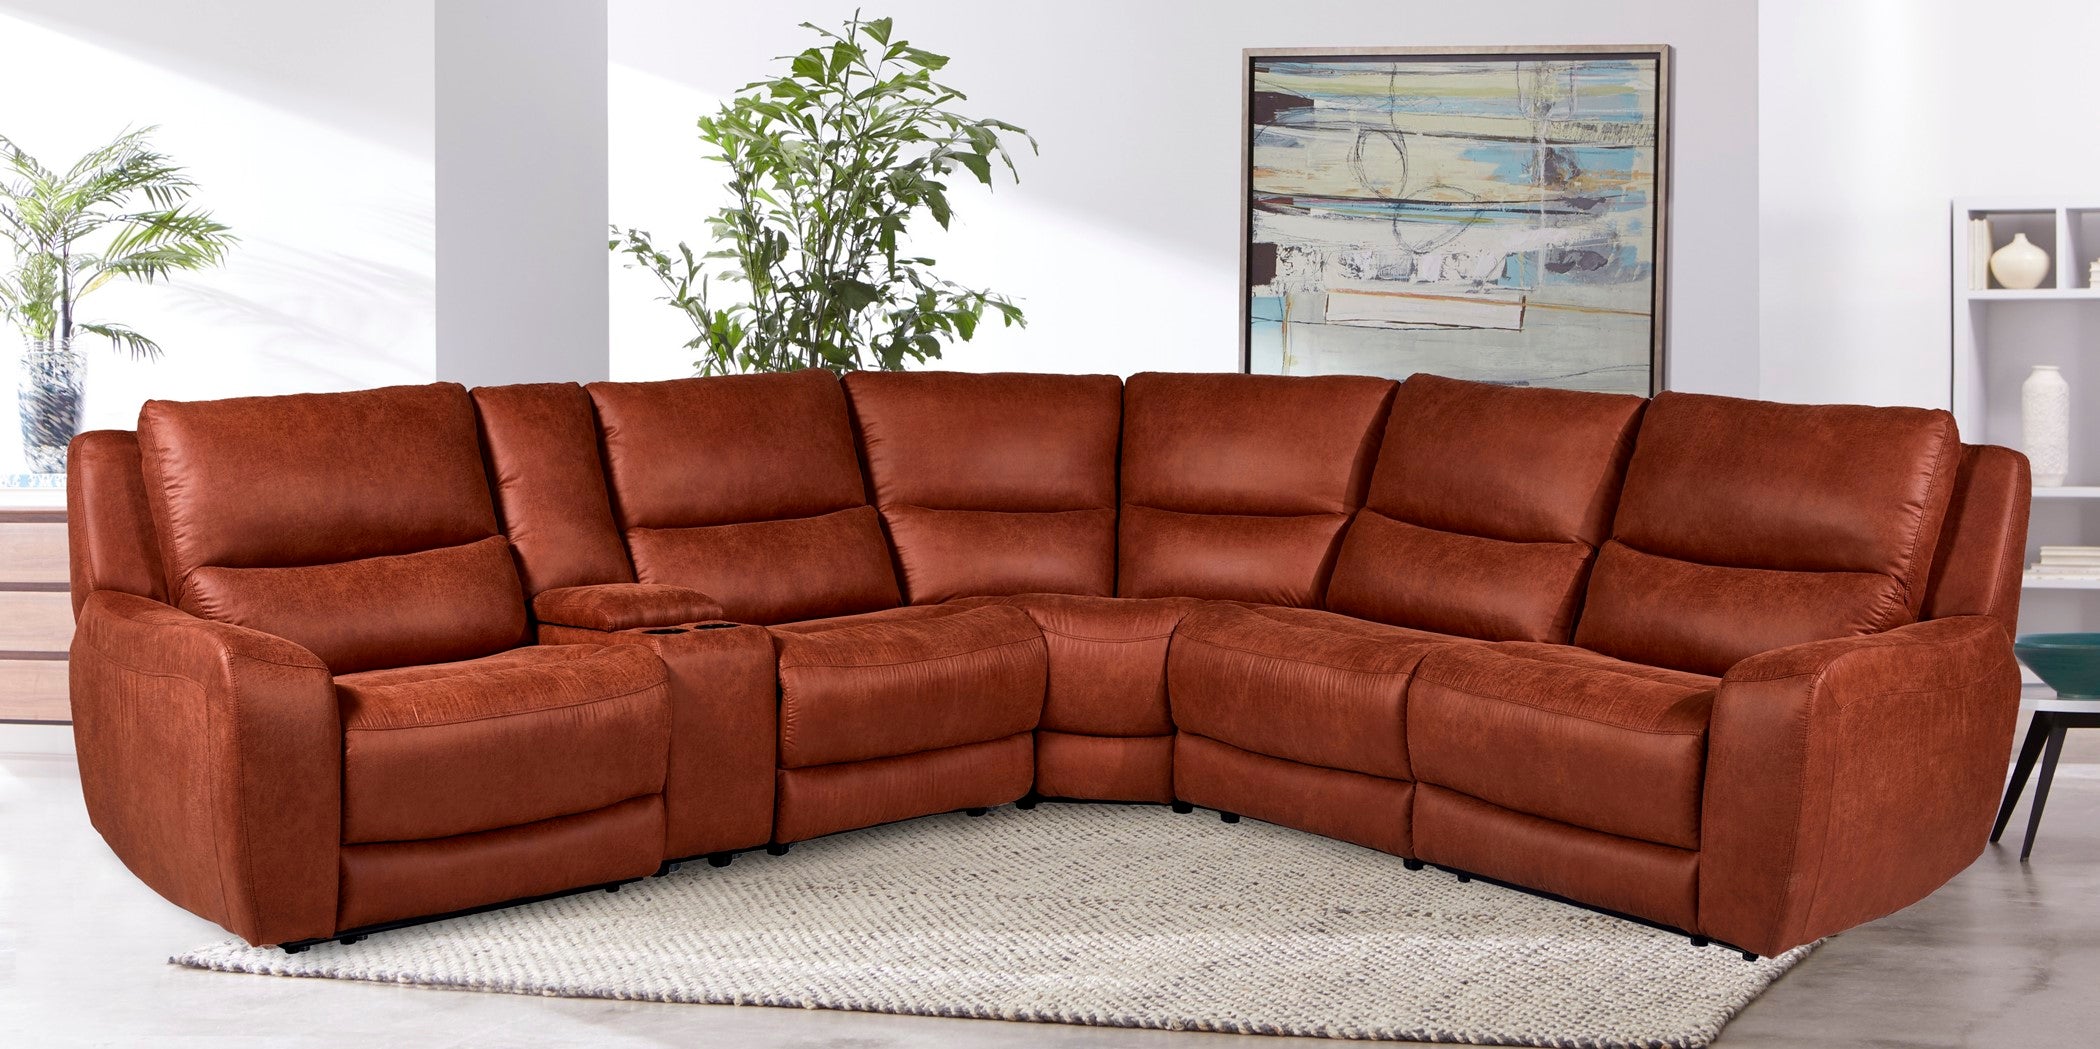 70777 TEXAS BROWN Sectional - Power Recliners on each end.